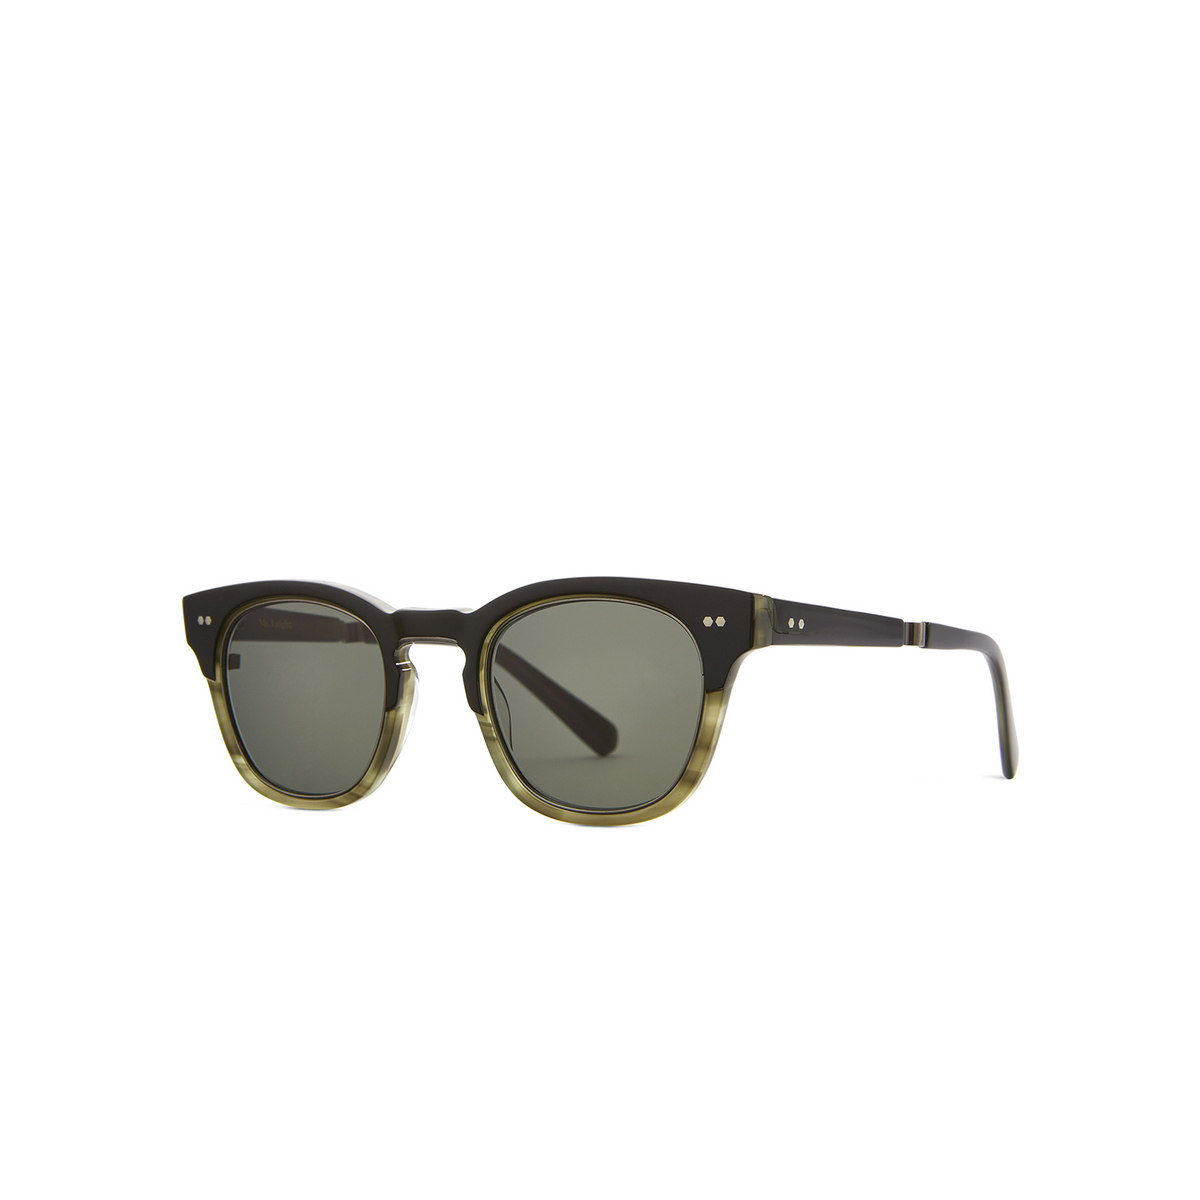 Mr. Leight HANALEI II S Sunglasses SYCL-PW/G15 Sycamore Laminate-Pewter - three-quarters view